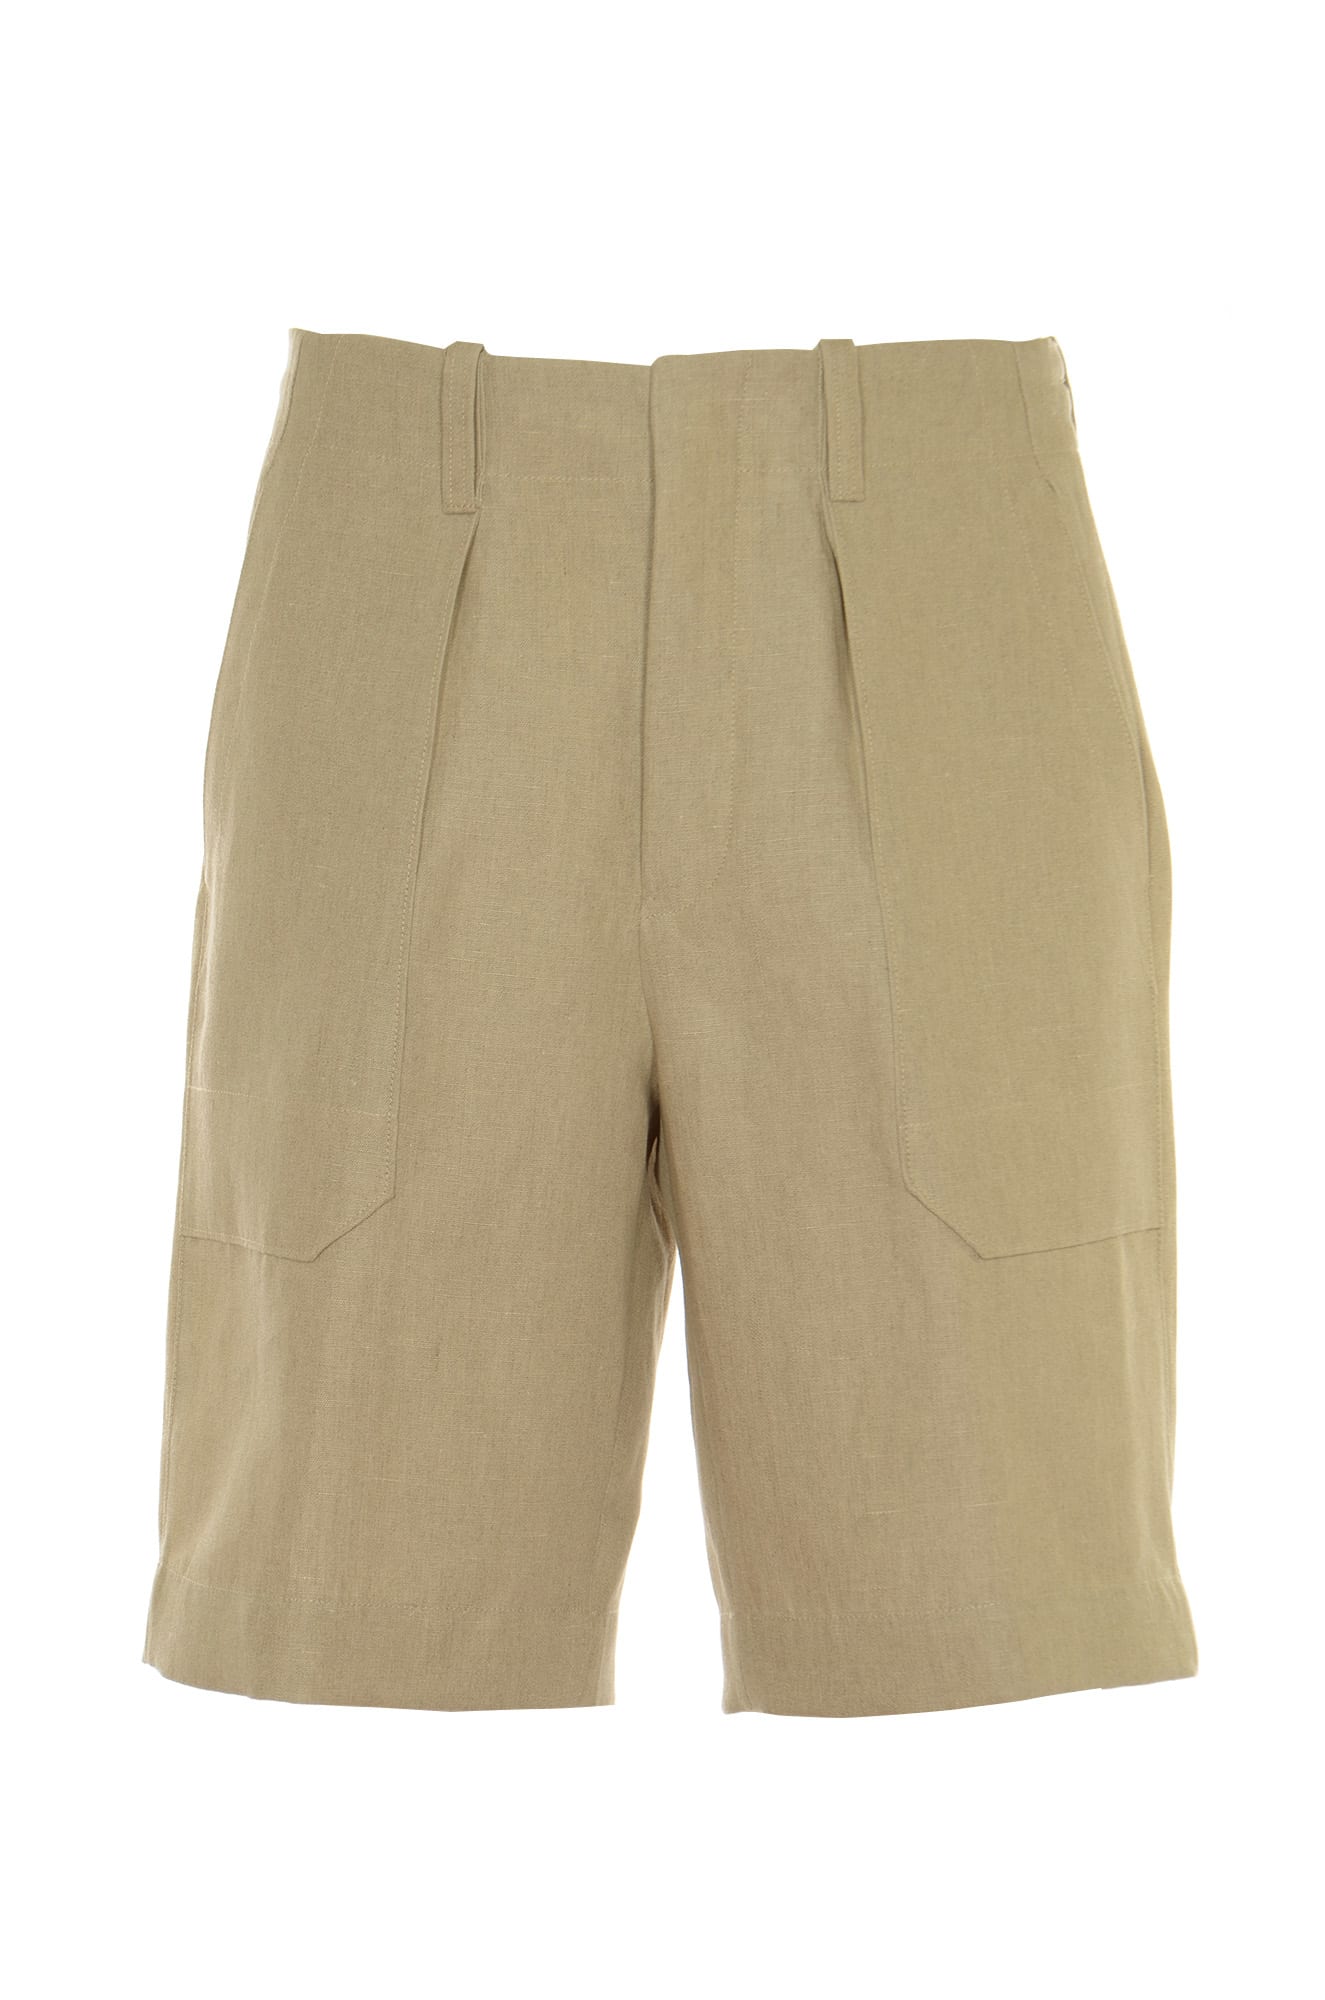 Z Zegna Concealed Buttoned Shorts